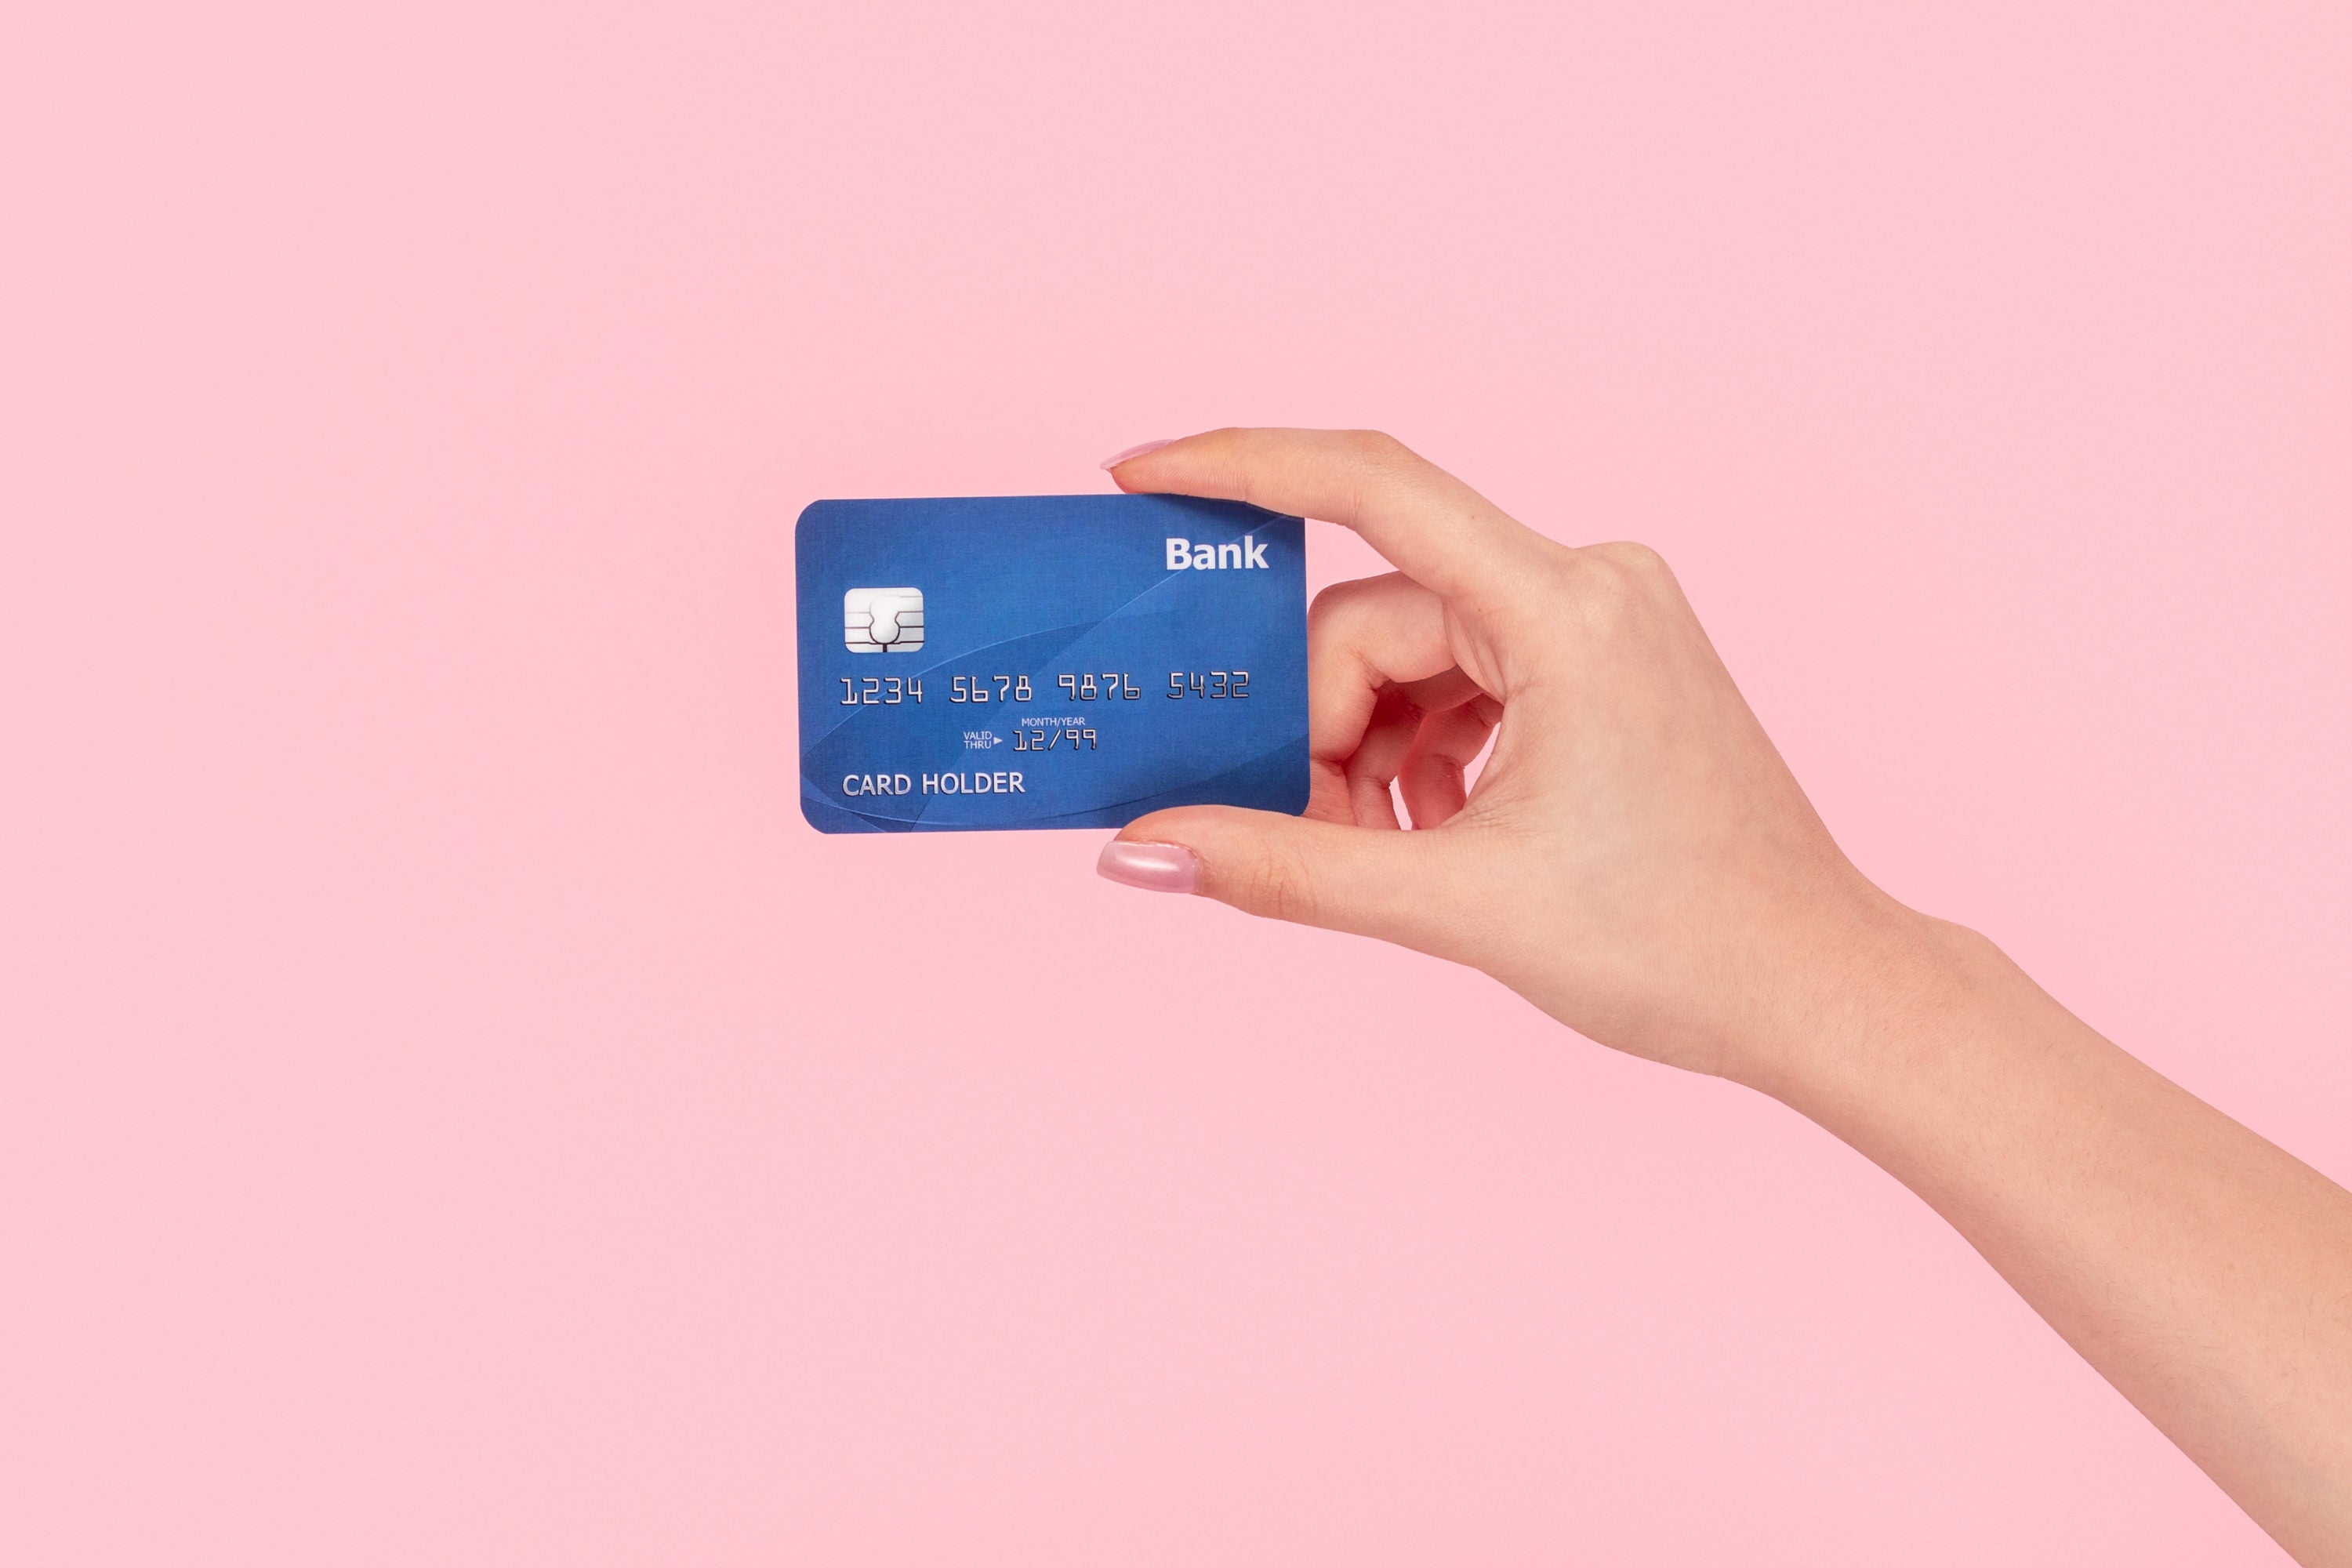 Holding a non branded credit card